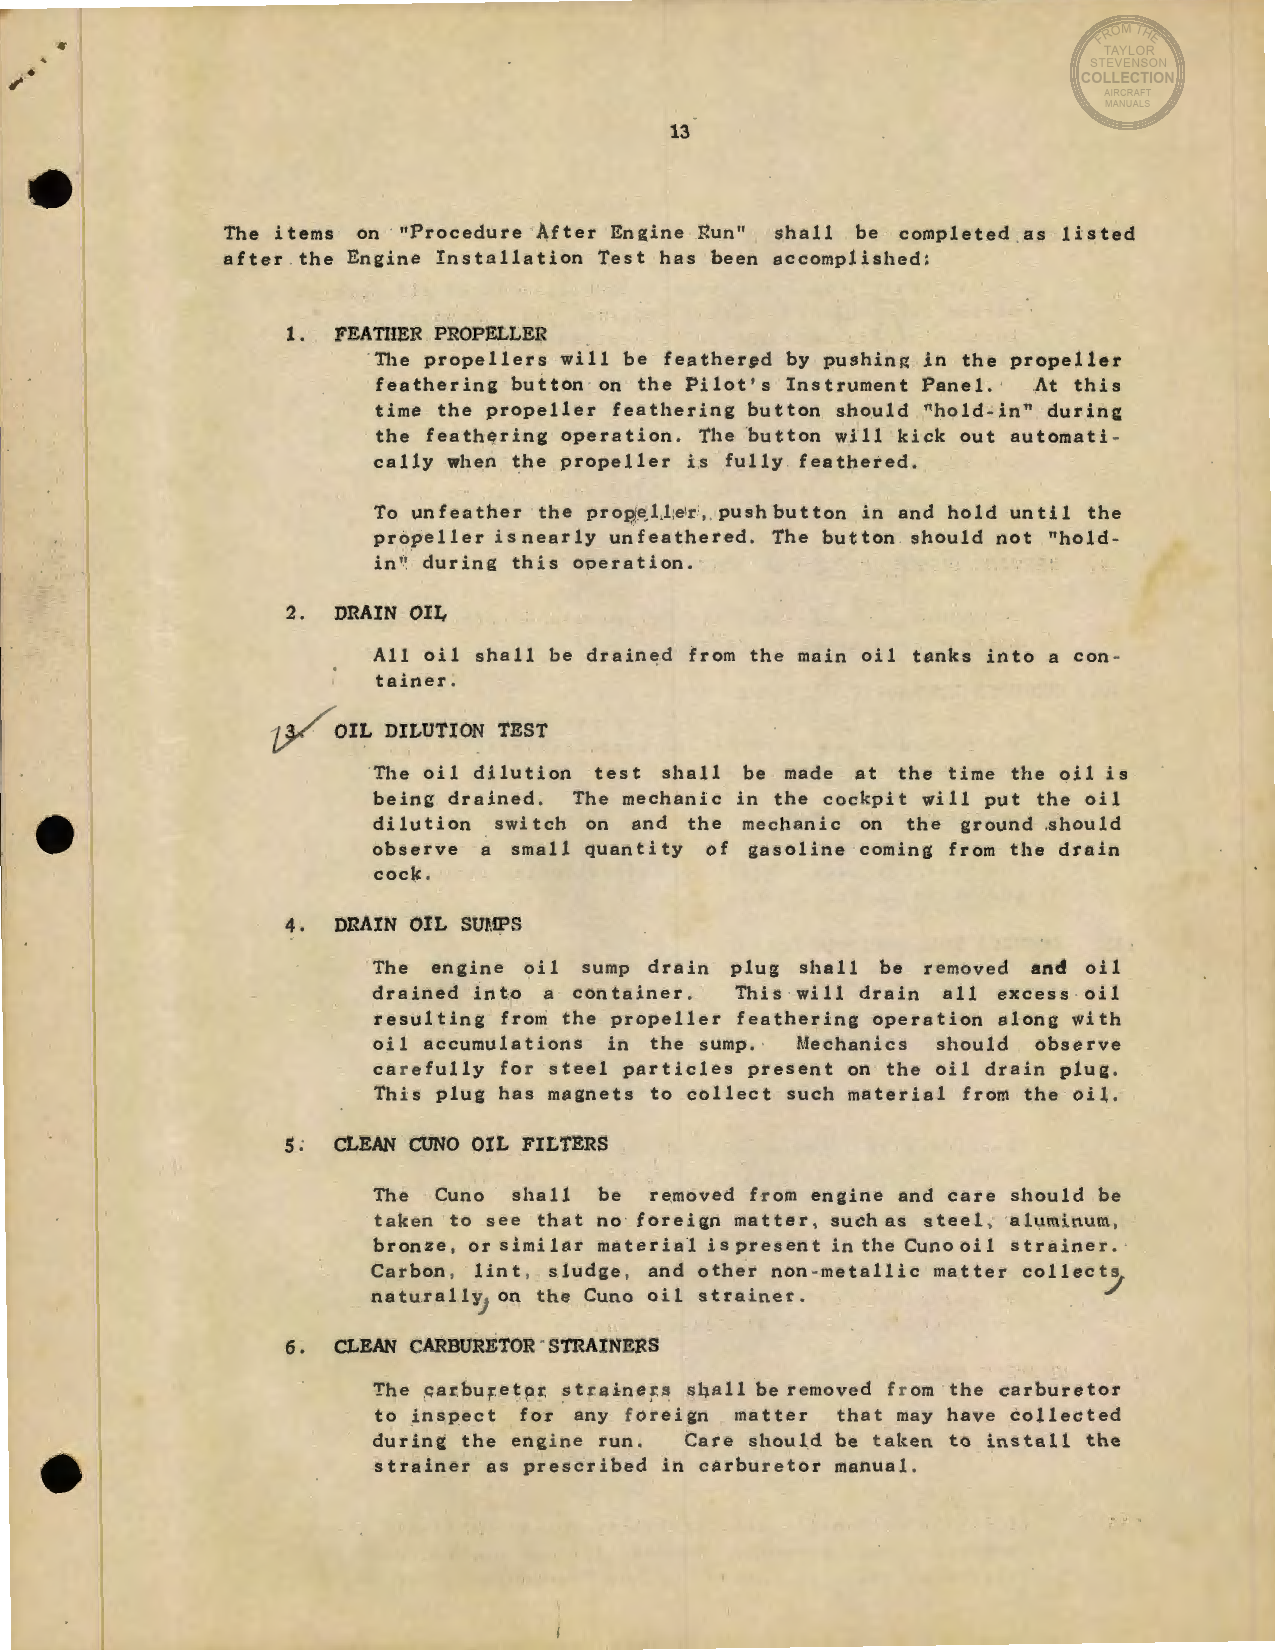 Sample page 5 from AirCorps Library document: Final Engine Run & Adjustments at High Speed of 46